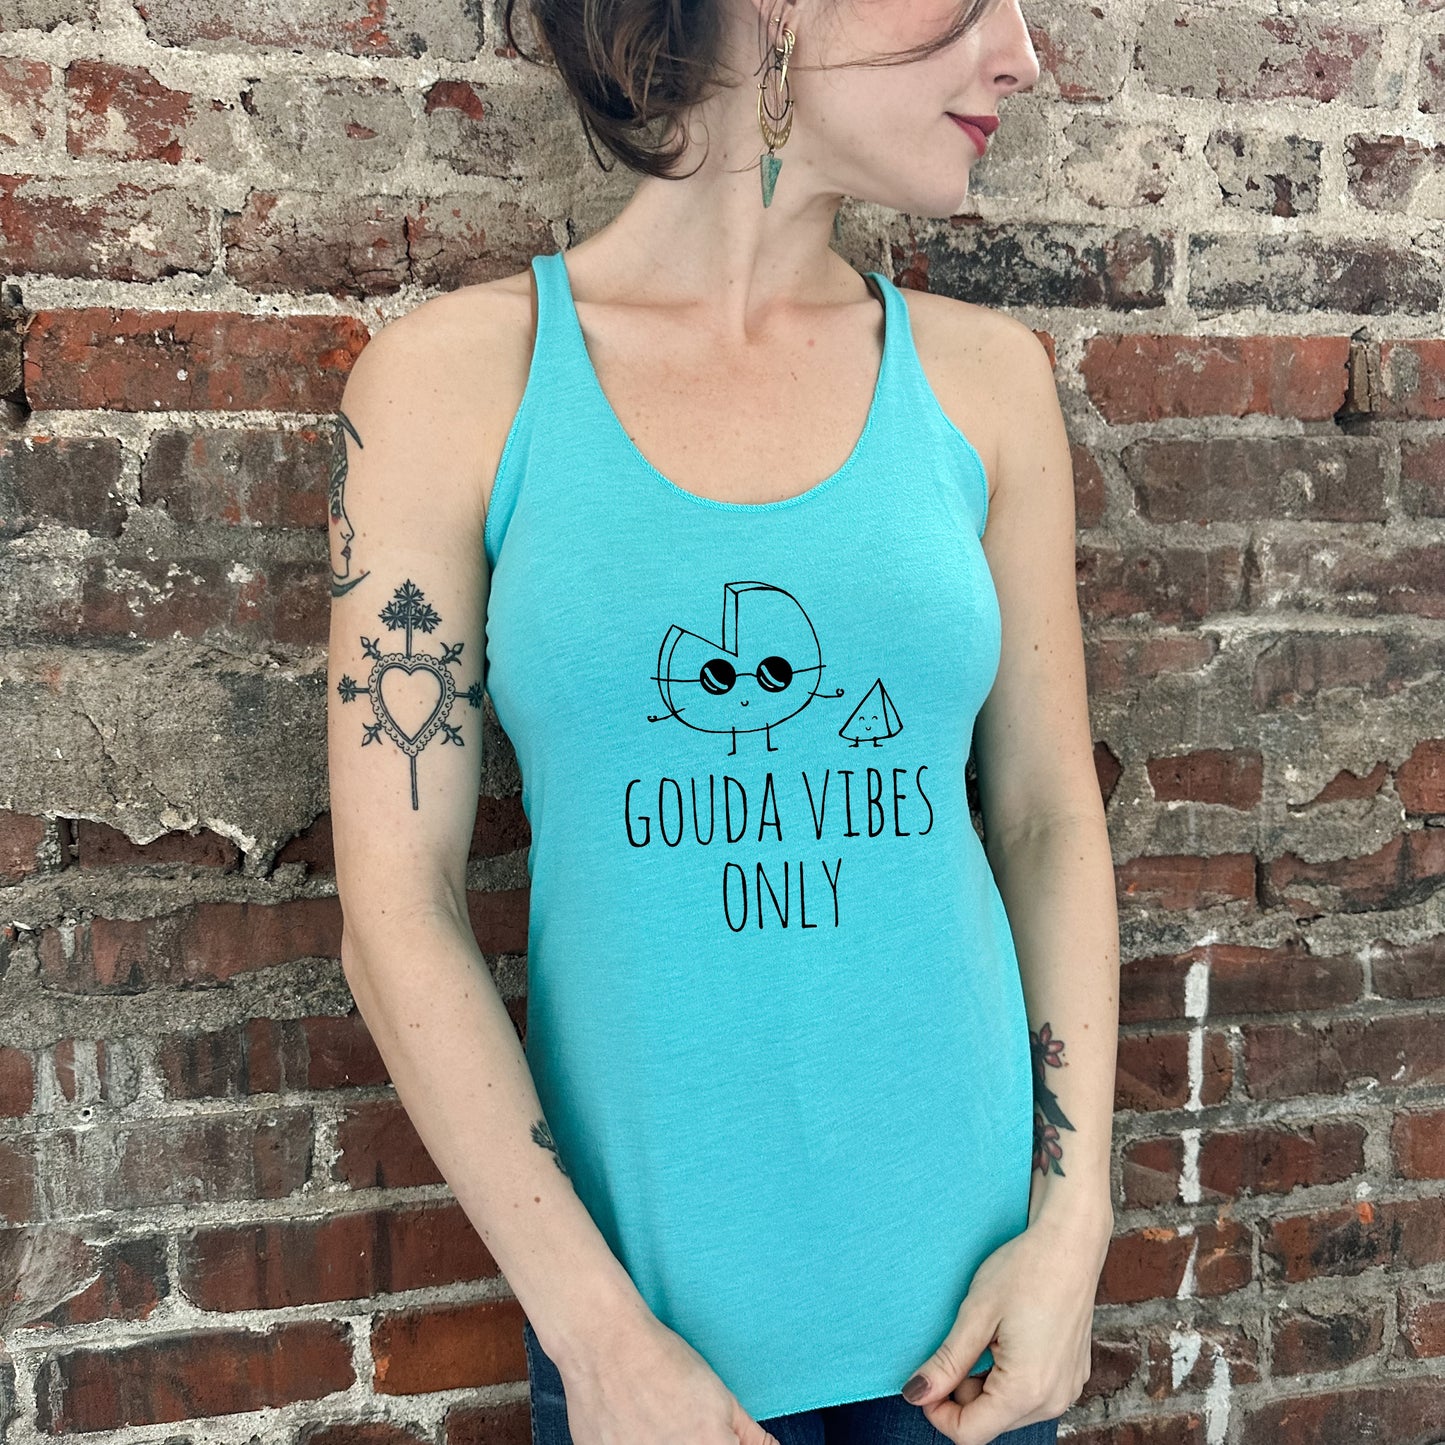 Gouda Vibes Only - Women's Tank - Heather Gray, Tahiti, or Envy